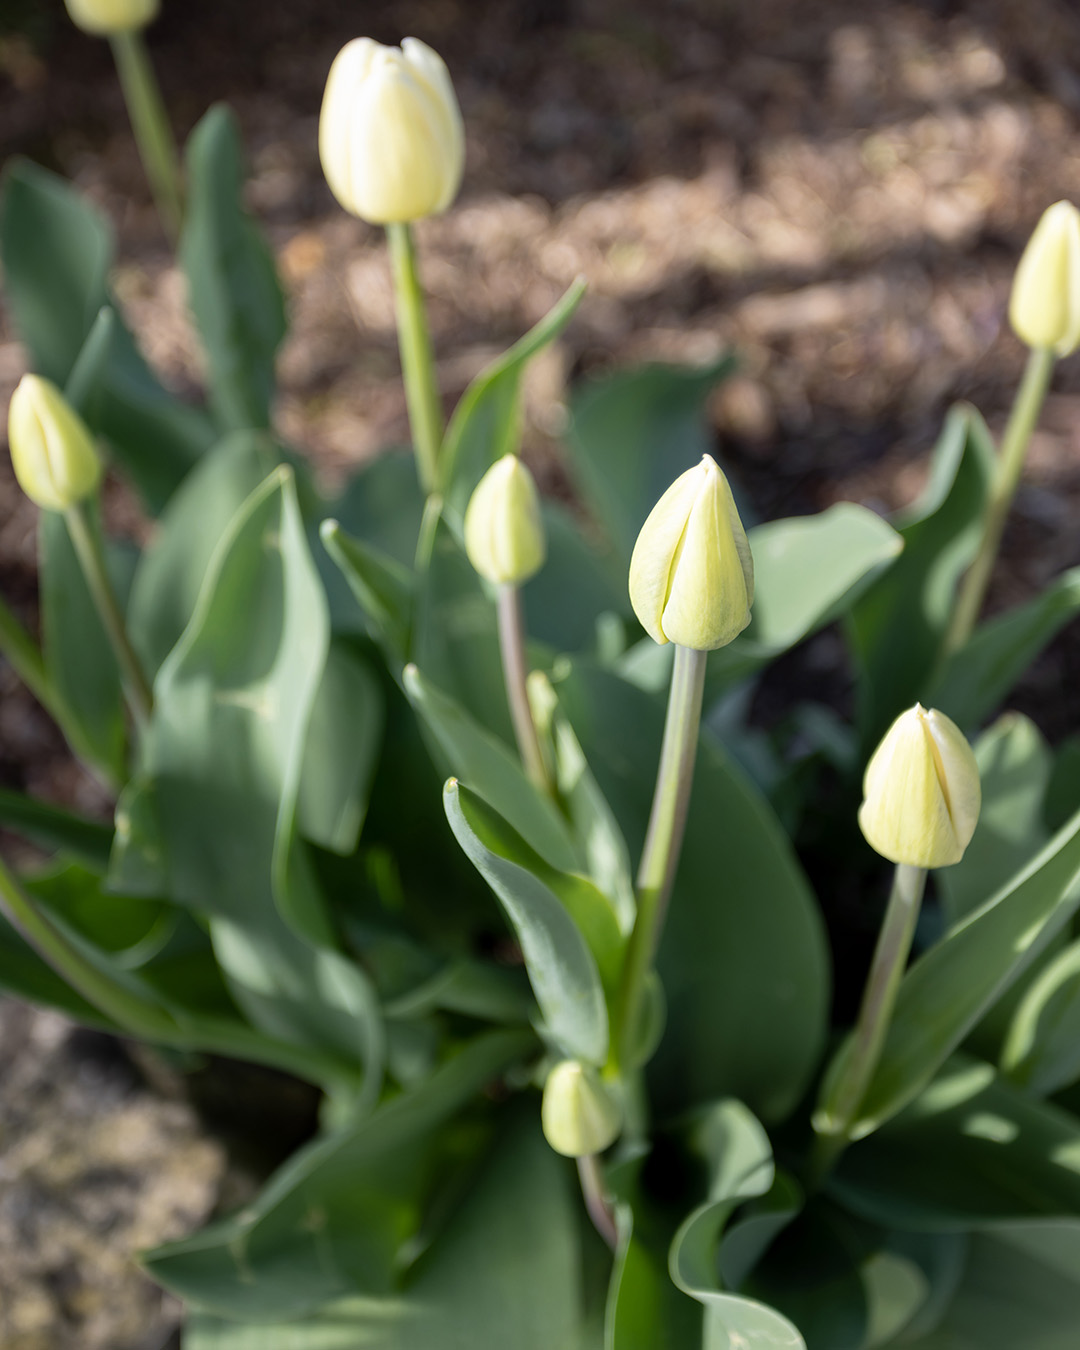 Do you discover half-eaten tulip leaves in your garden every spring? Here's how to keep bunnies from eating tulips.